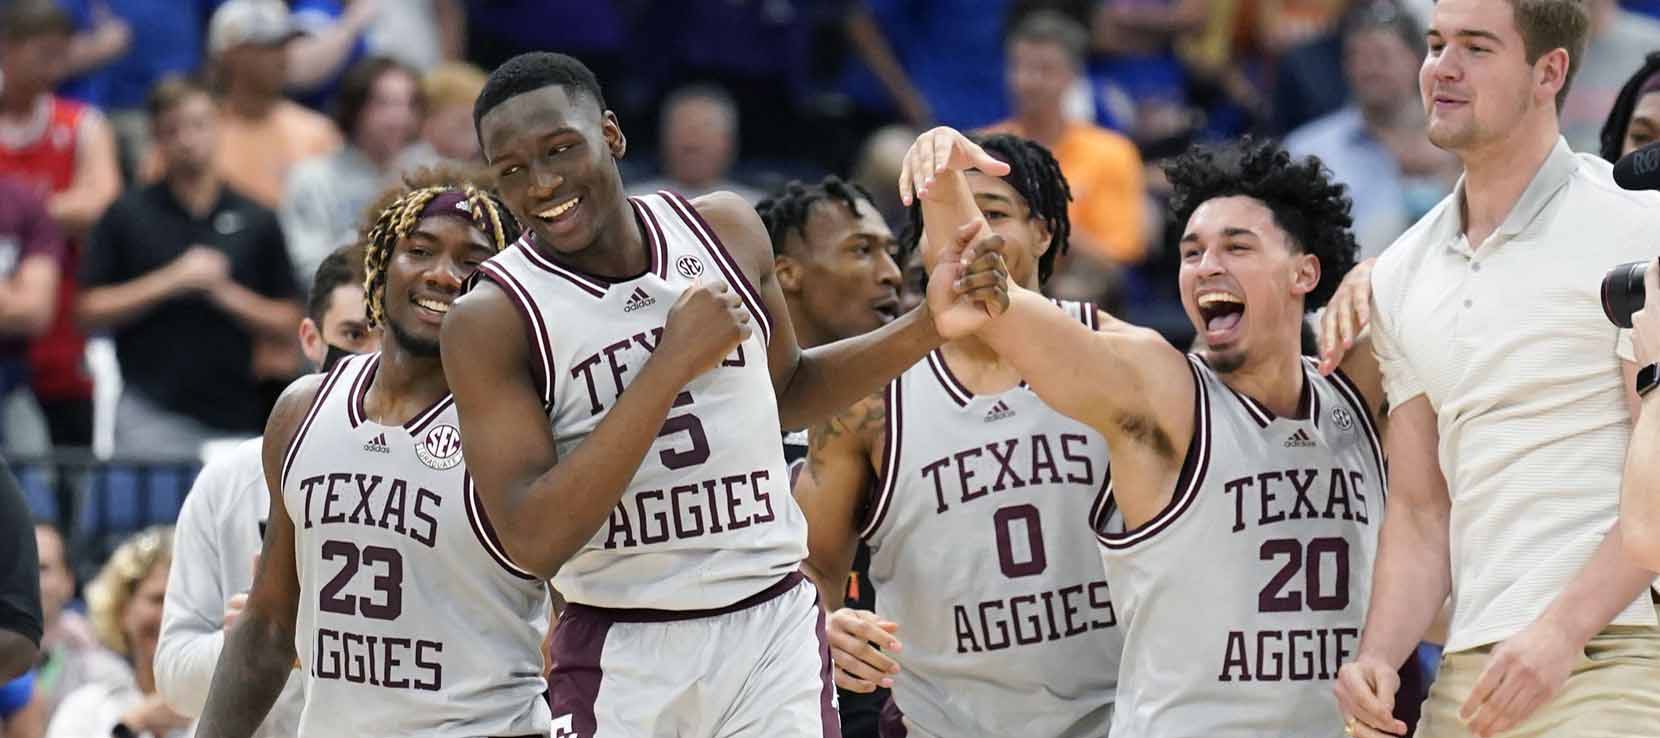 Washington State vs Texas A&M NIT Game Preview and Betting Odd